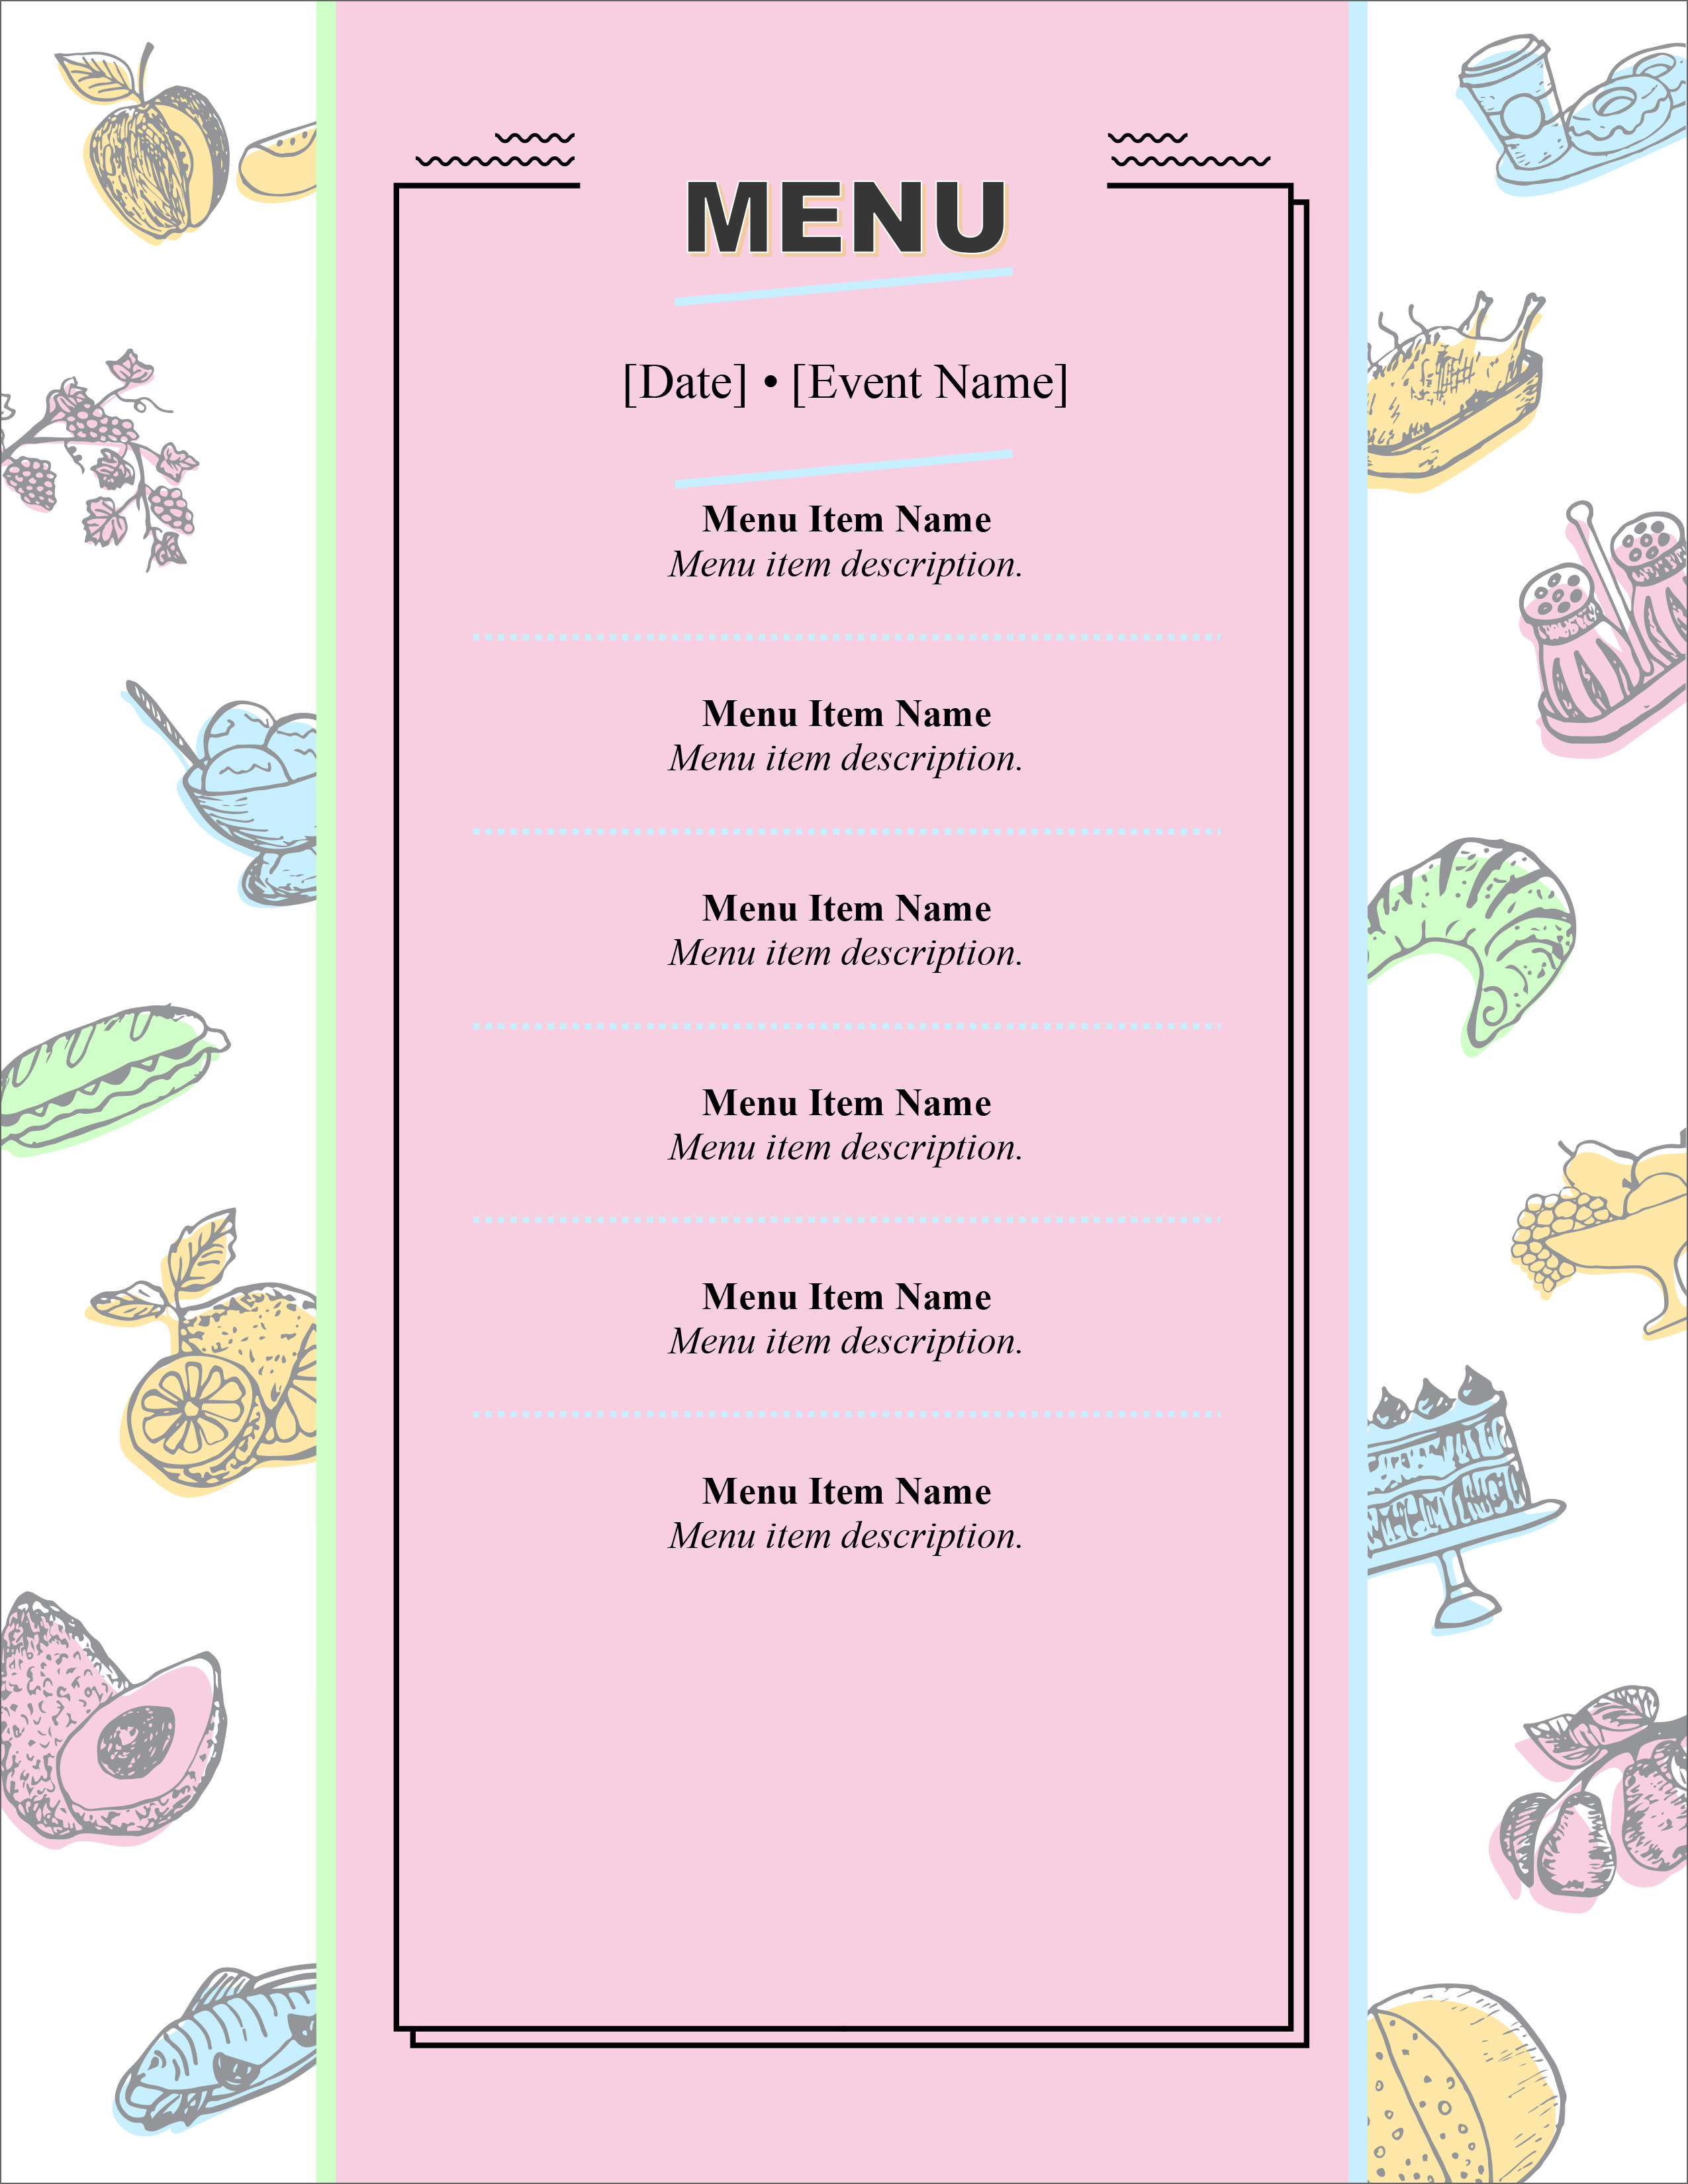 22 Free Simple Menu Templates For Restaurants, Cafes, And Parties Inside Free Restaurant Menu Templates For Microsoft Word